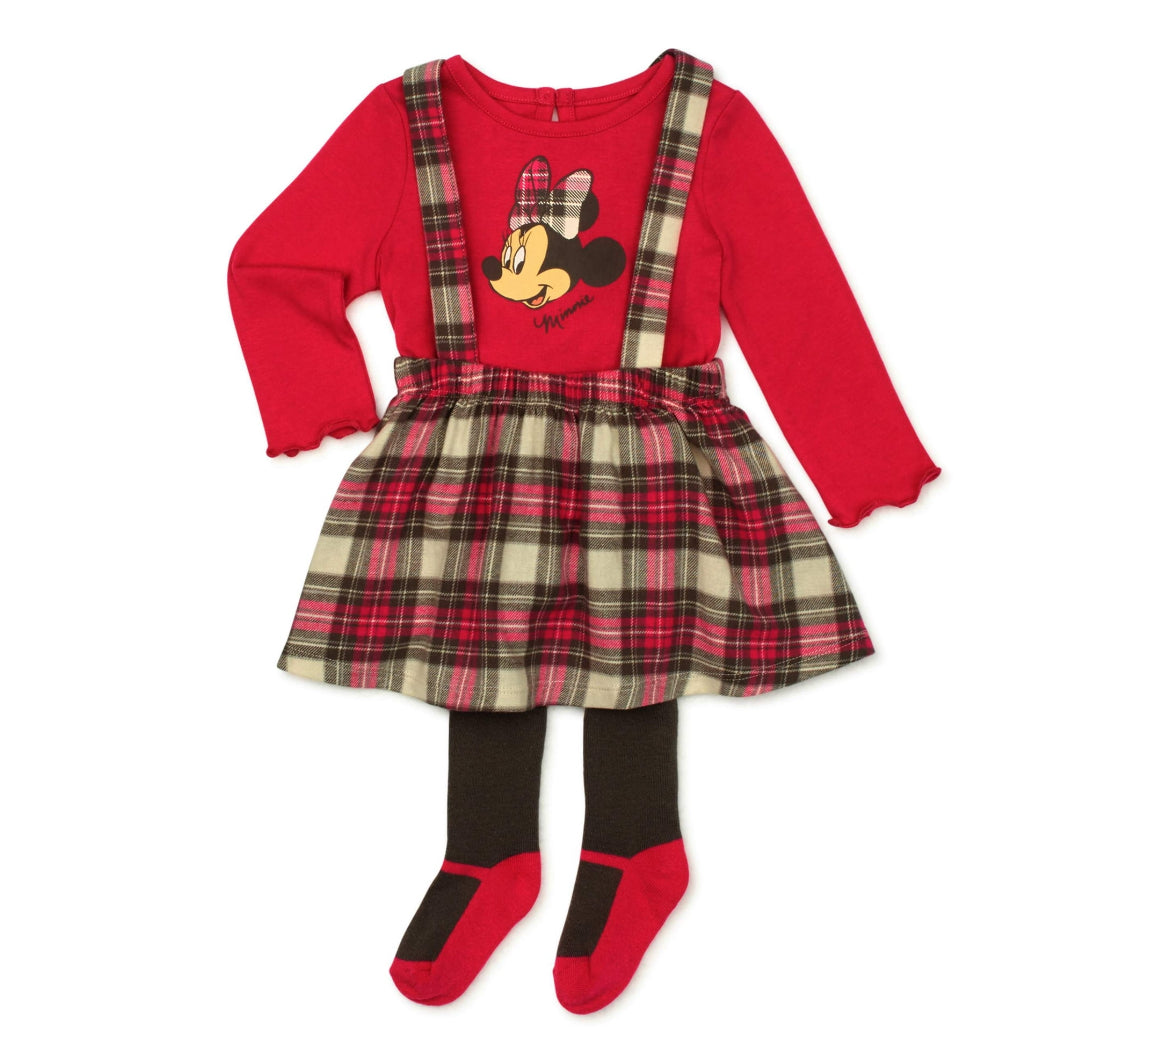 Disney Minnie Mouse Baby Girl Top, Jumper Dress & Tights, 3-Piece Outfit Set